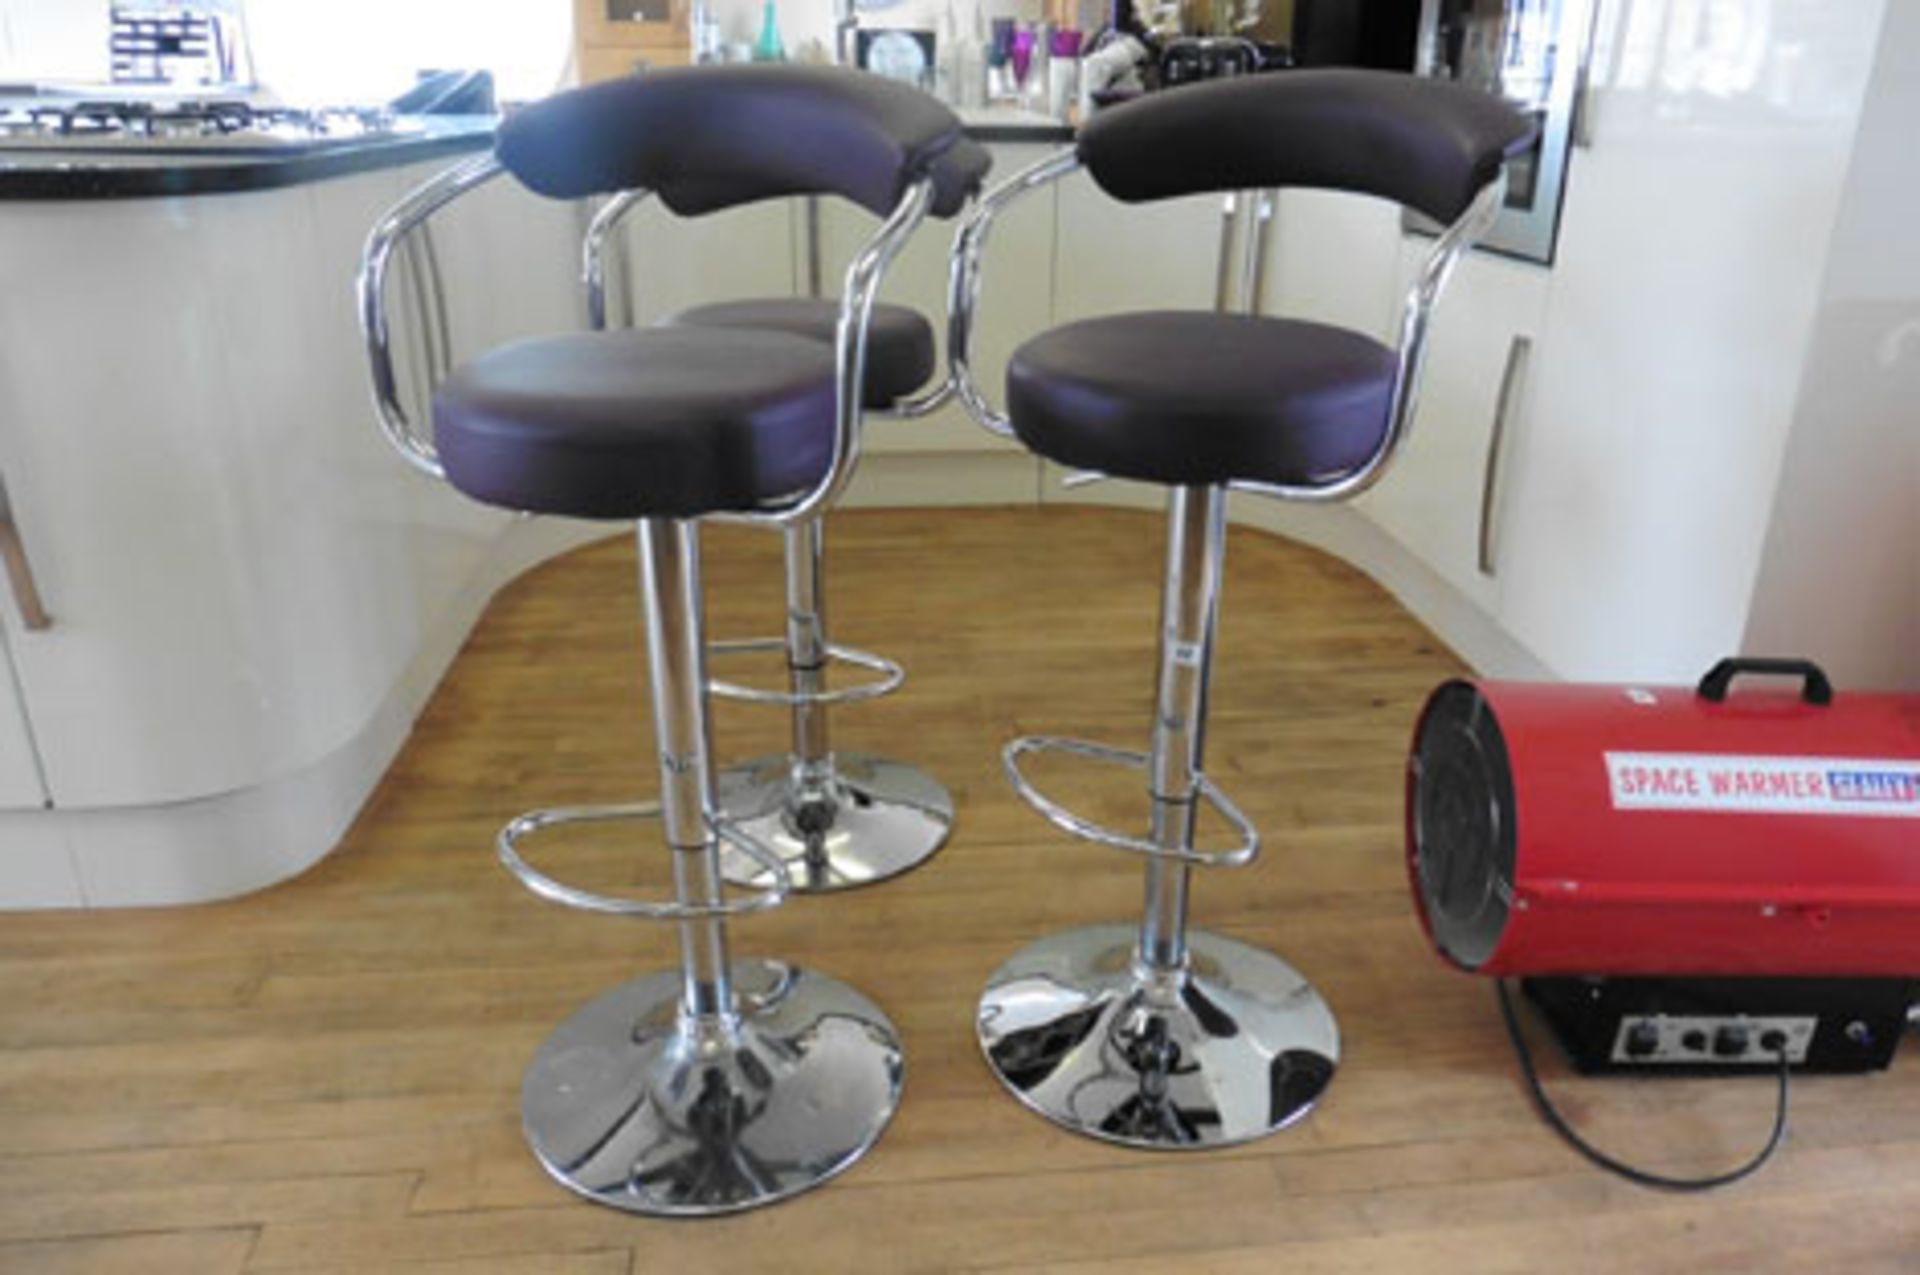 Set of 3 aubergine leather effect upholstered and chrome adjustable height bar stools with back